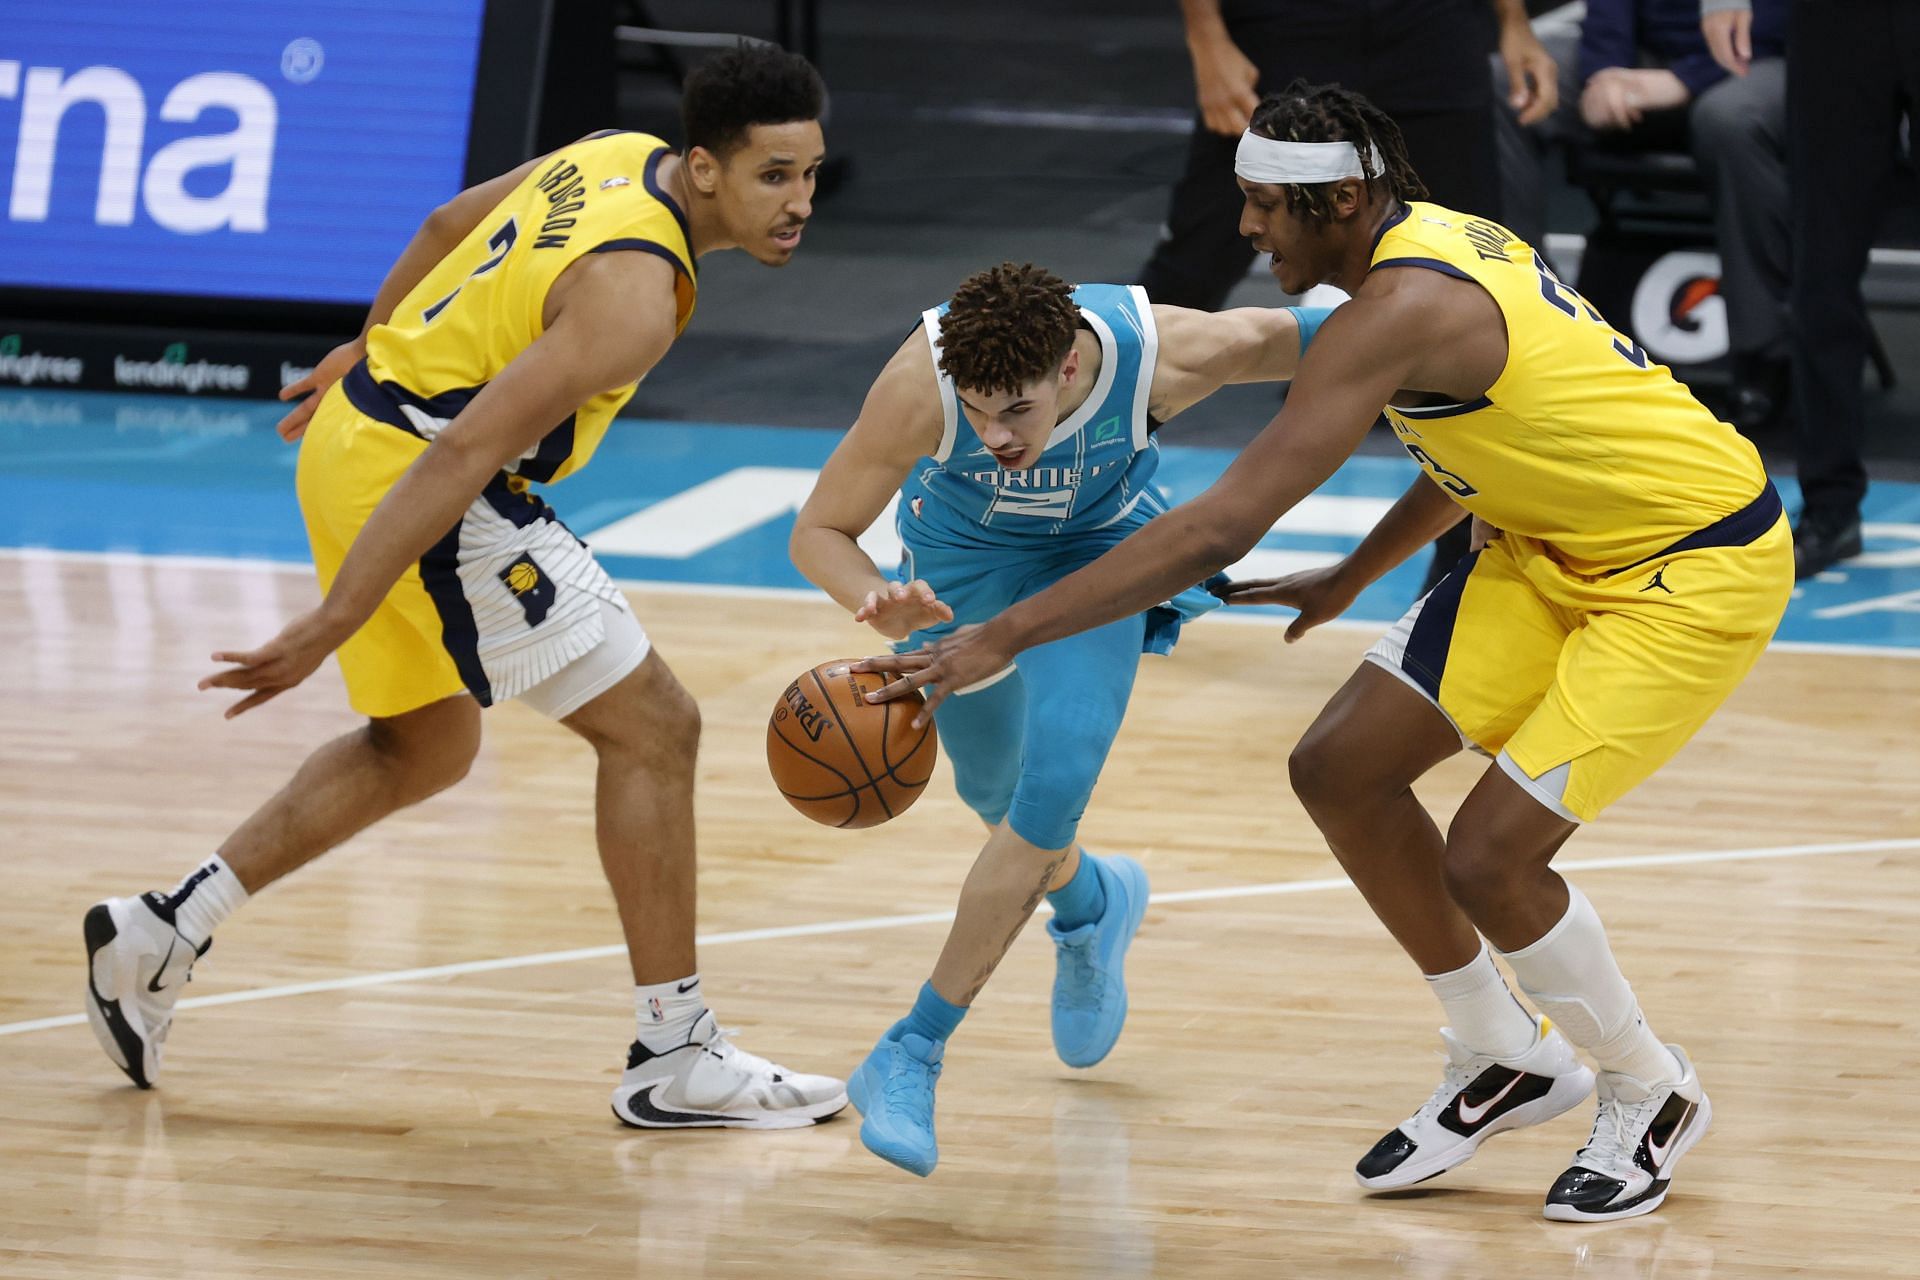 The Indiana Pacers visit the Charlotte Hornets to open their 2021-22 NBA campaign.